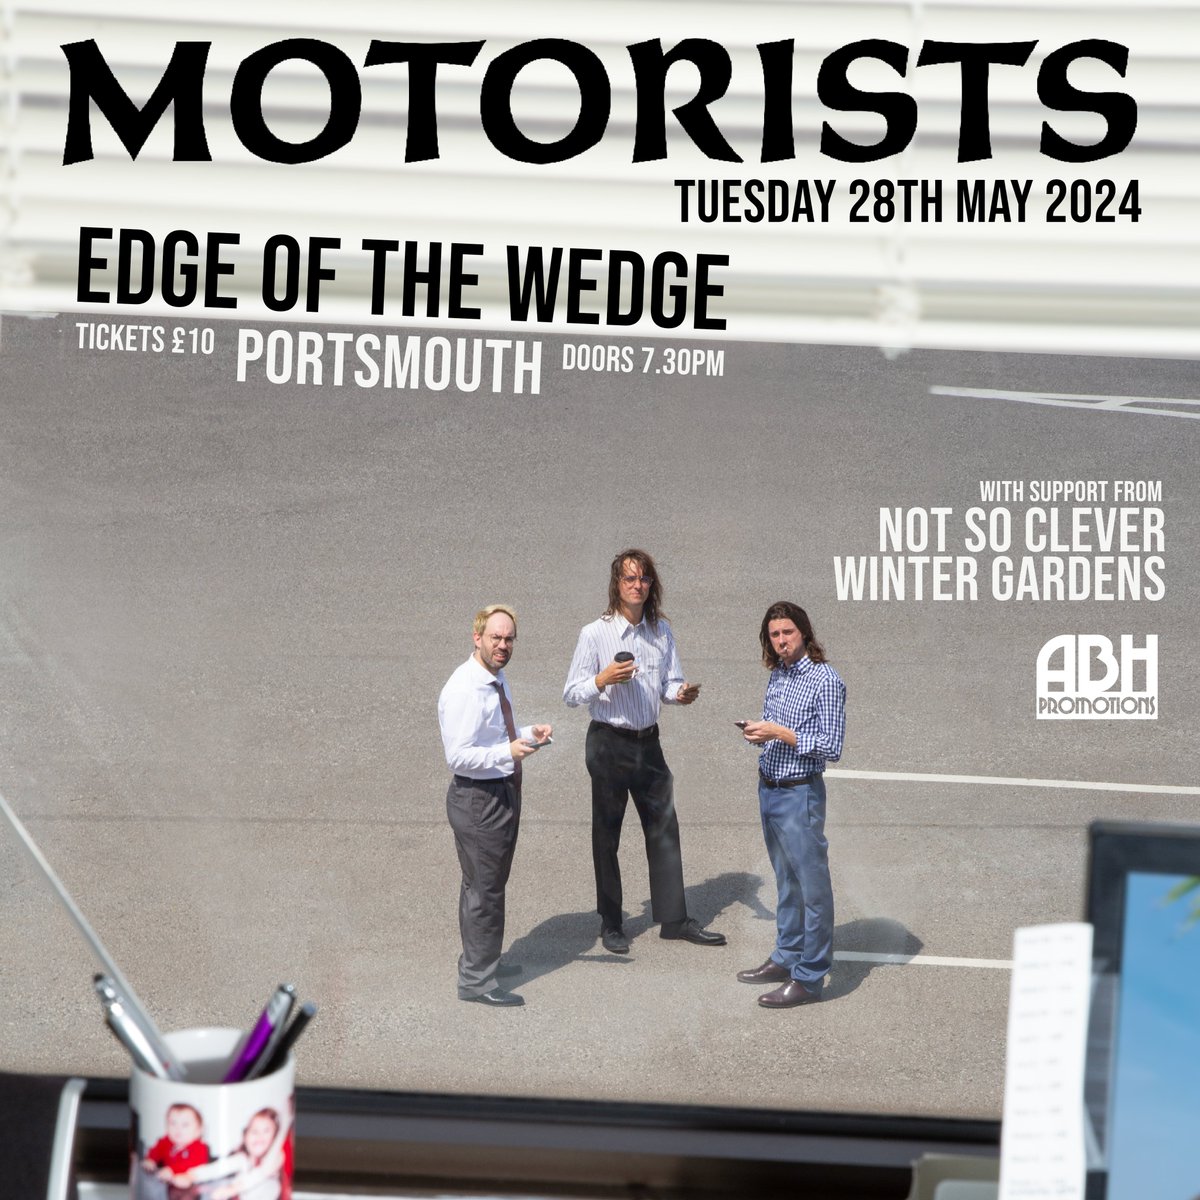 Toronto slacker-rock trio Motorists join us in the Edge next week as one out of two UK tour dates! Expect an evening full of super catchy tunes pushing jangly guitars, infectious power pop hooks and a steady motorik beat Support from @notsocleverband + @WinterGardensUK